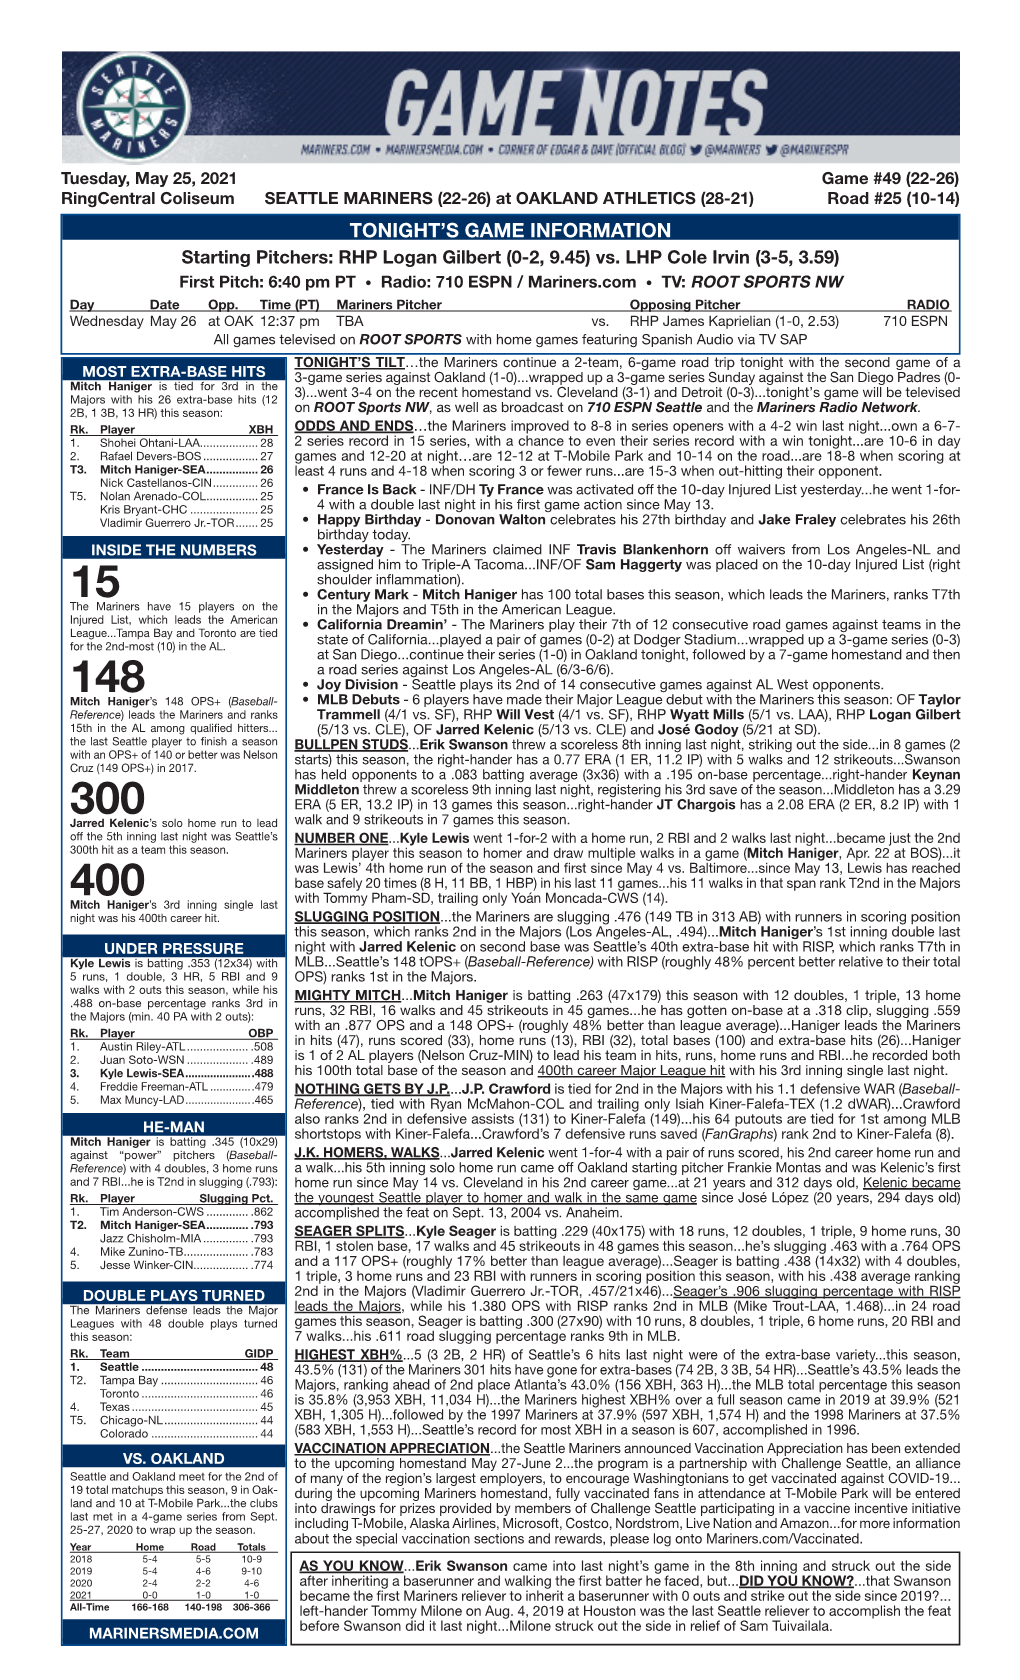 05-25-2021 Mariners Game Notes